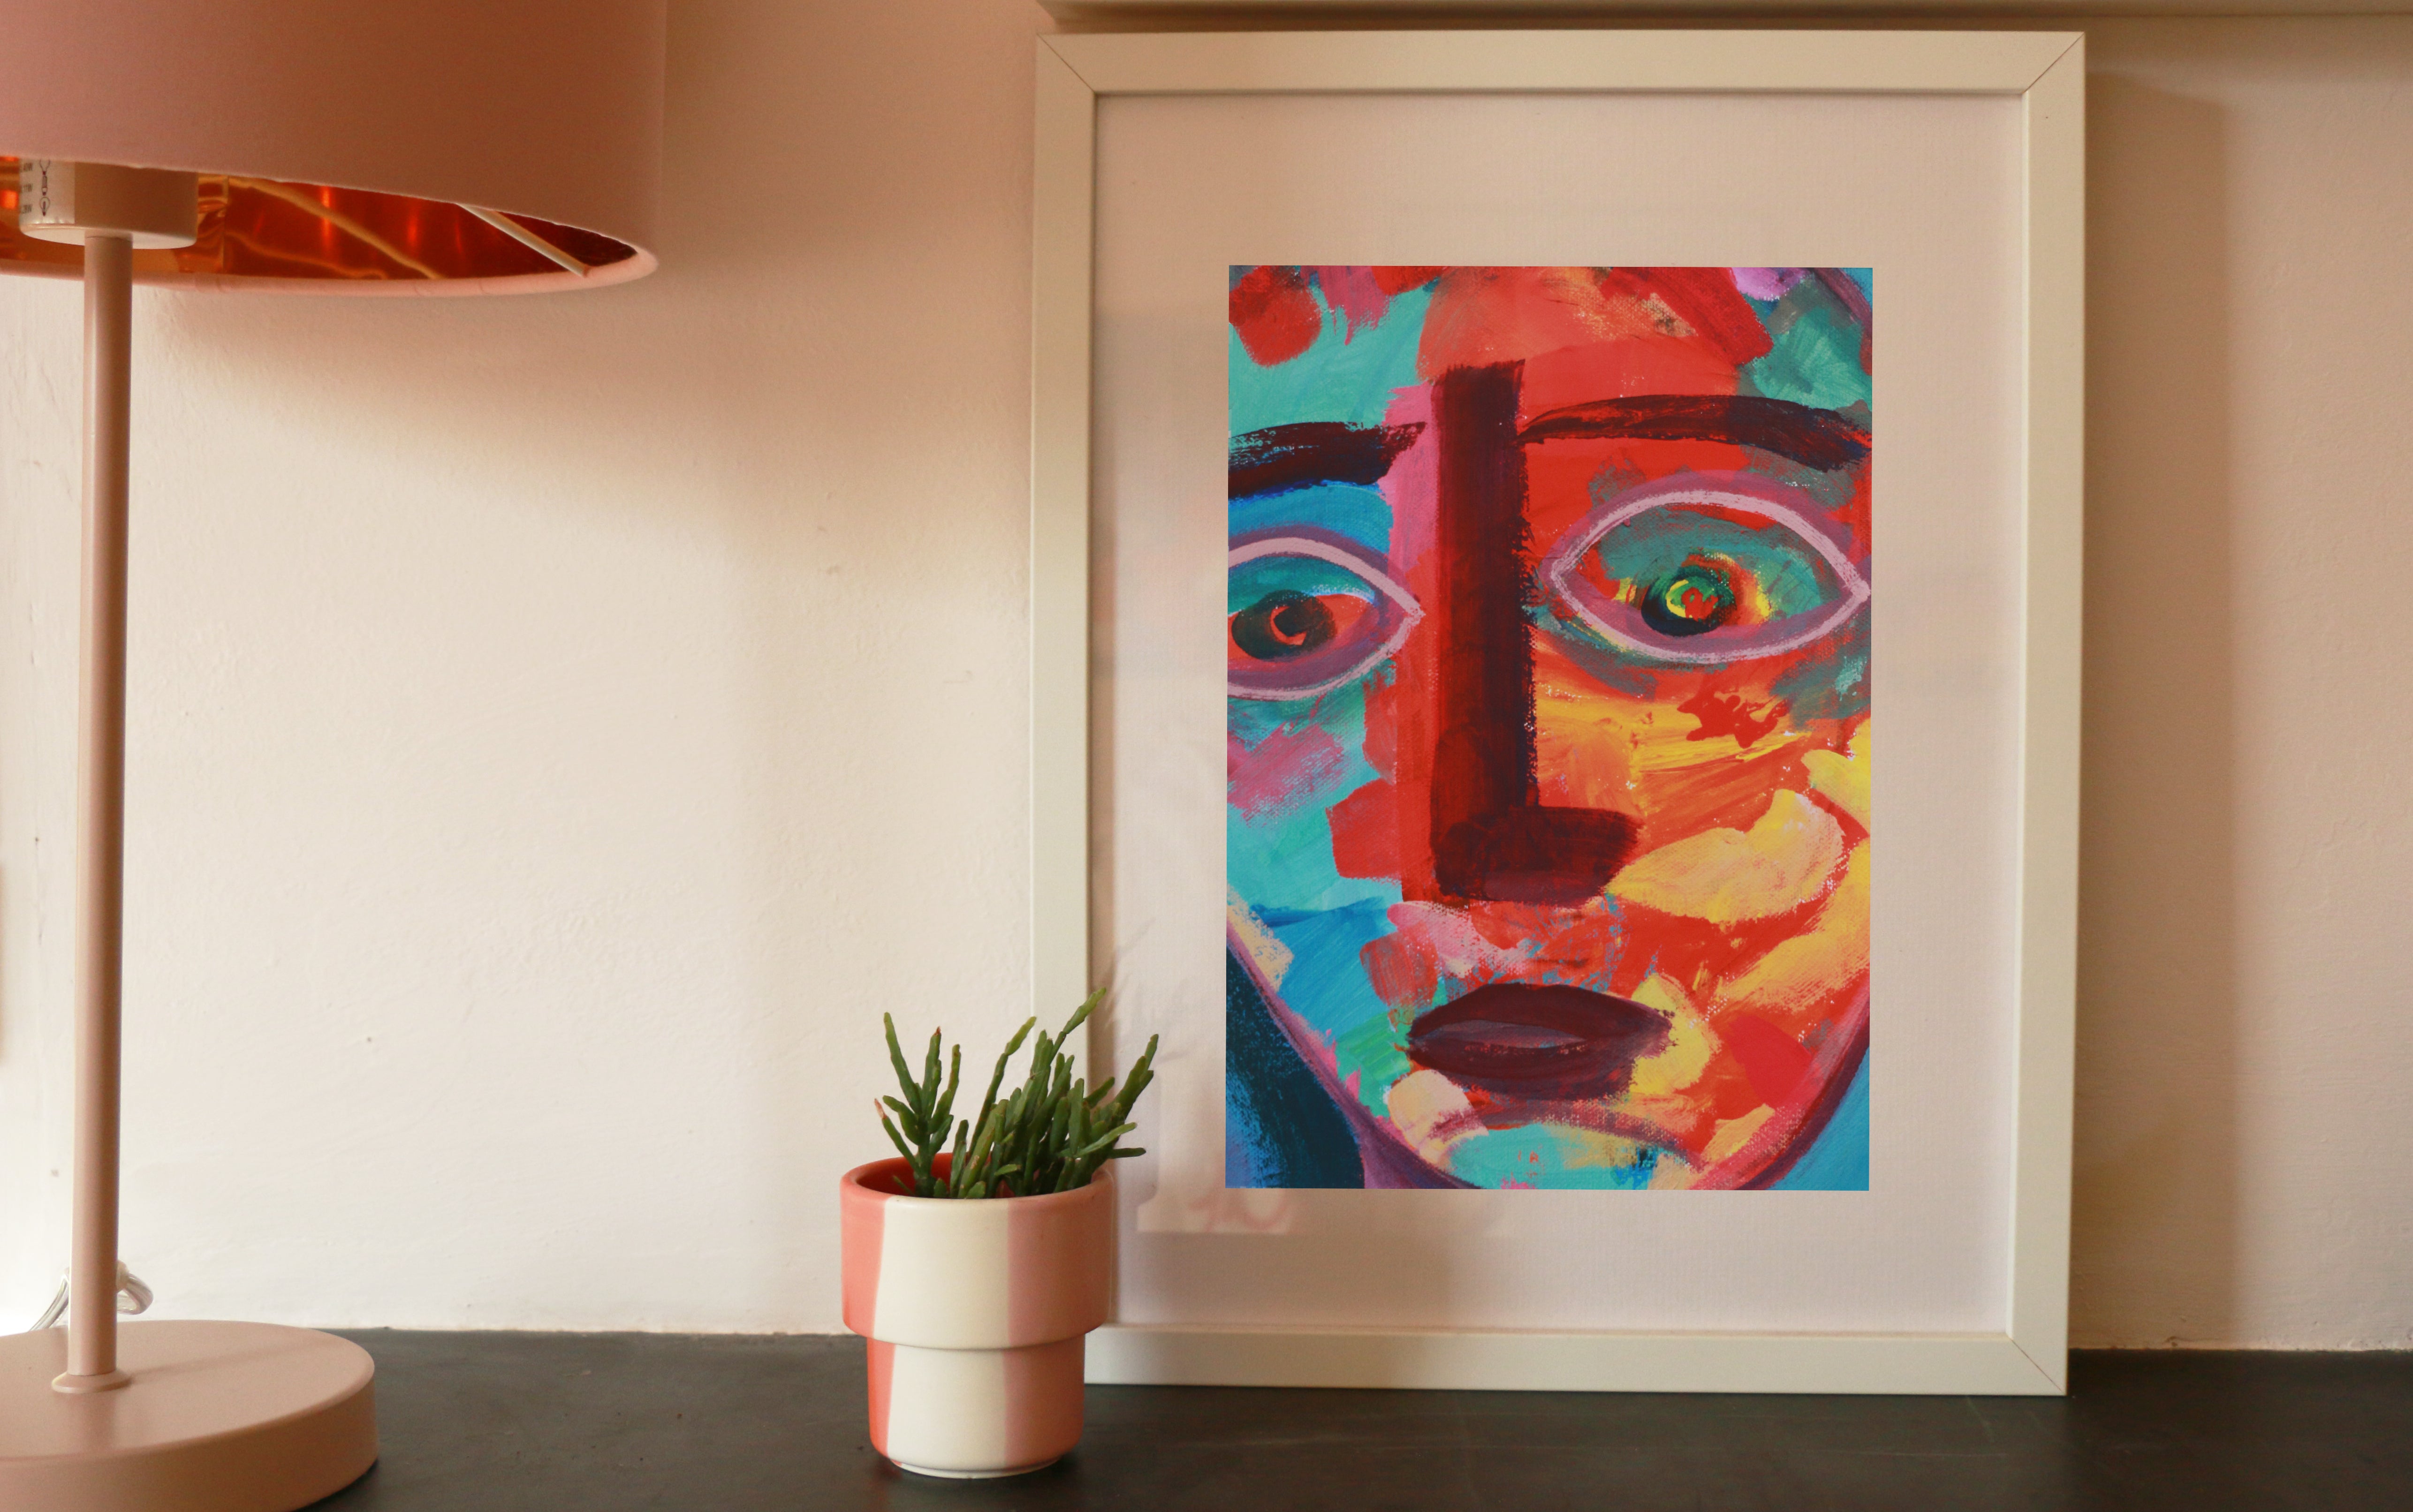 An image of a colourful face, framed and standing on a mantelpiece.